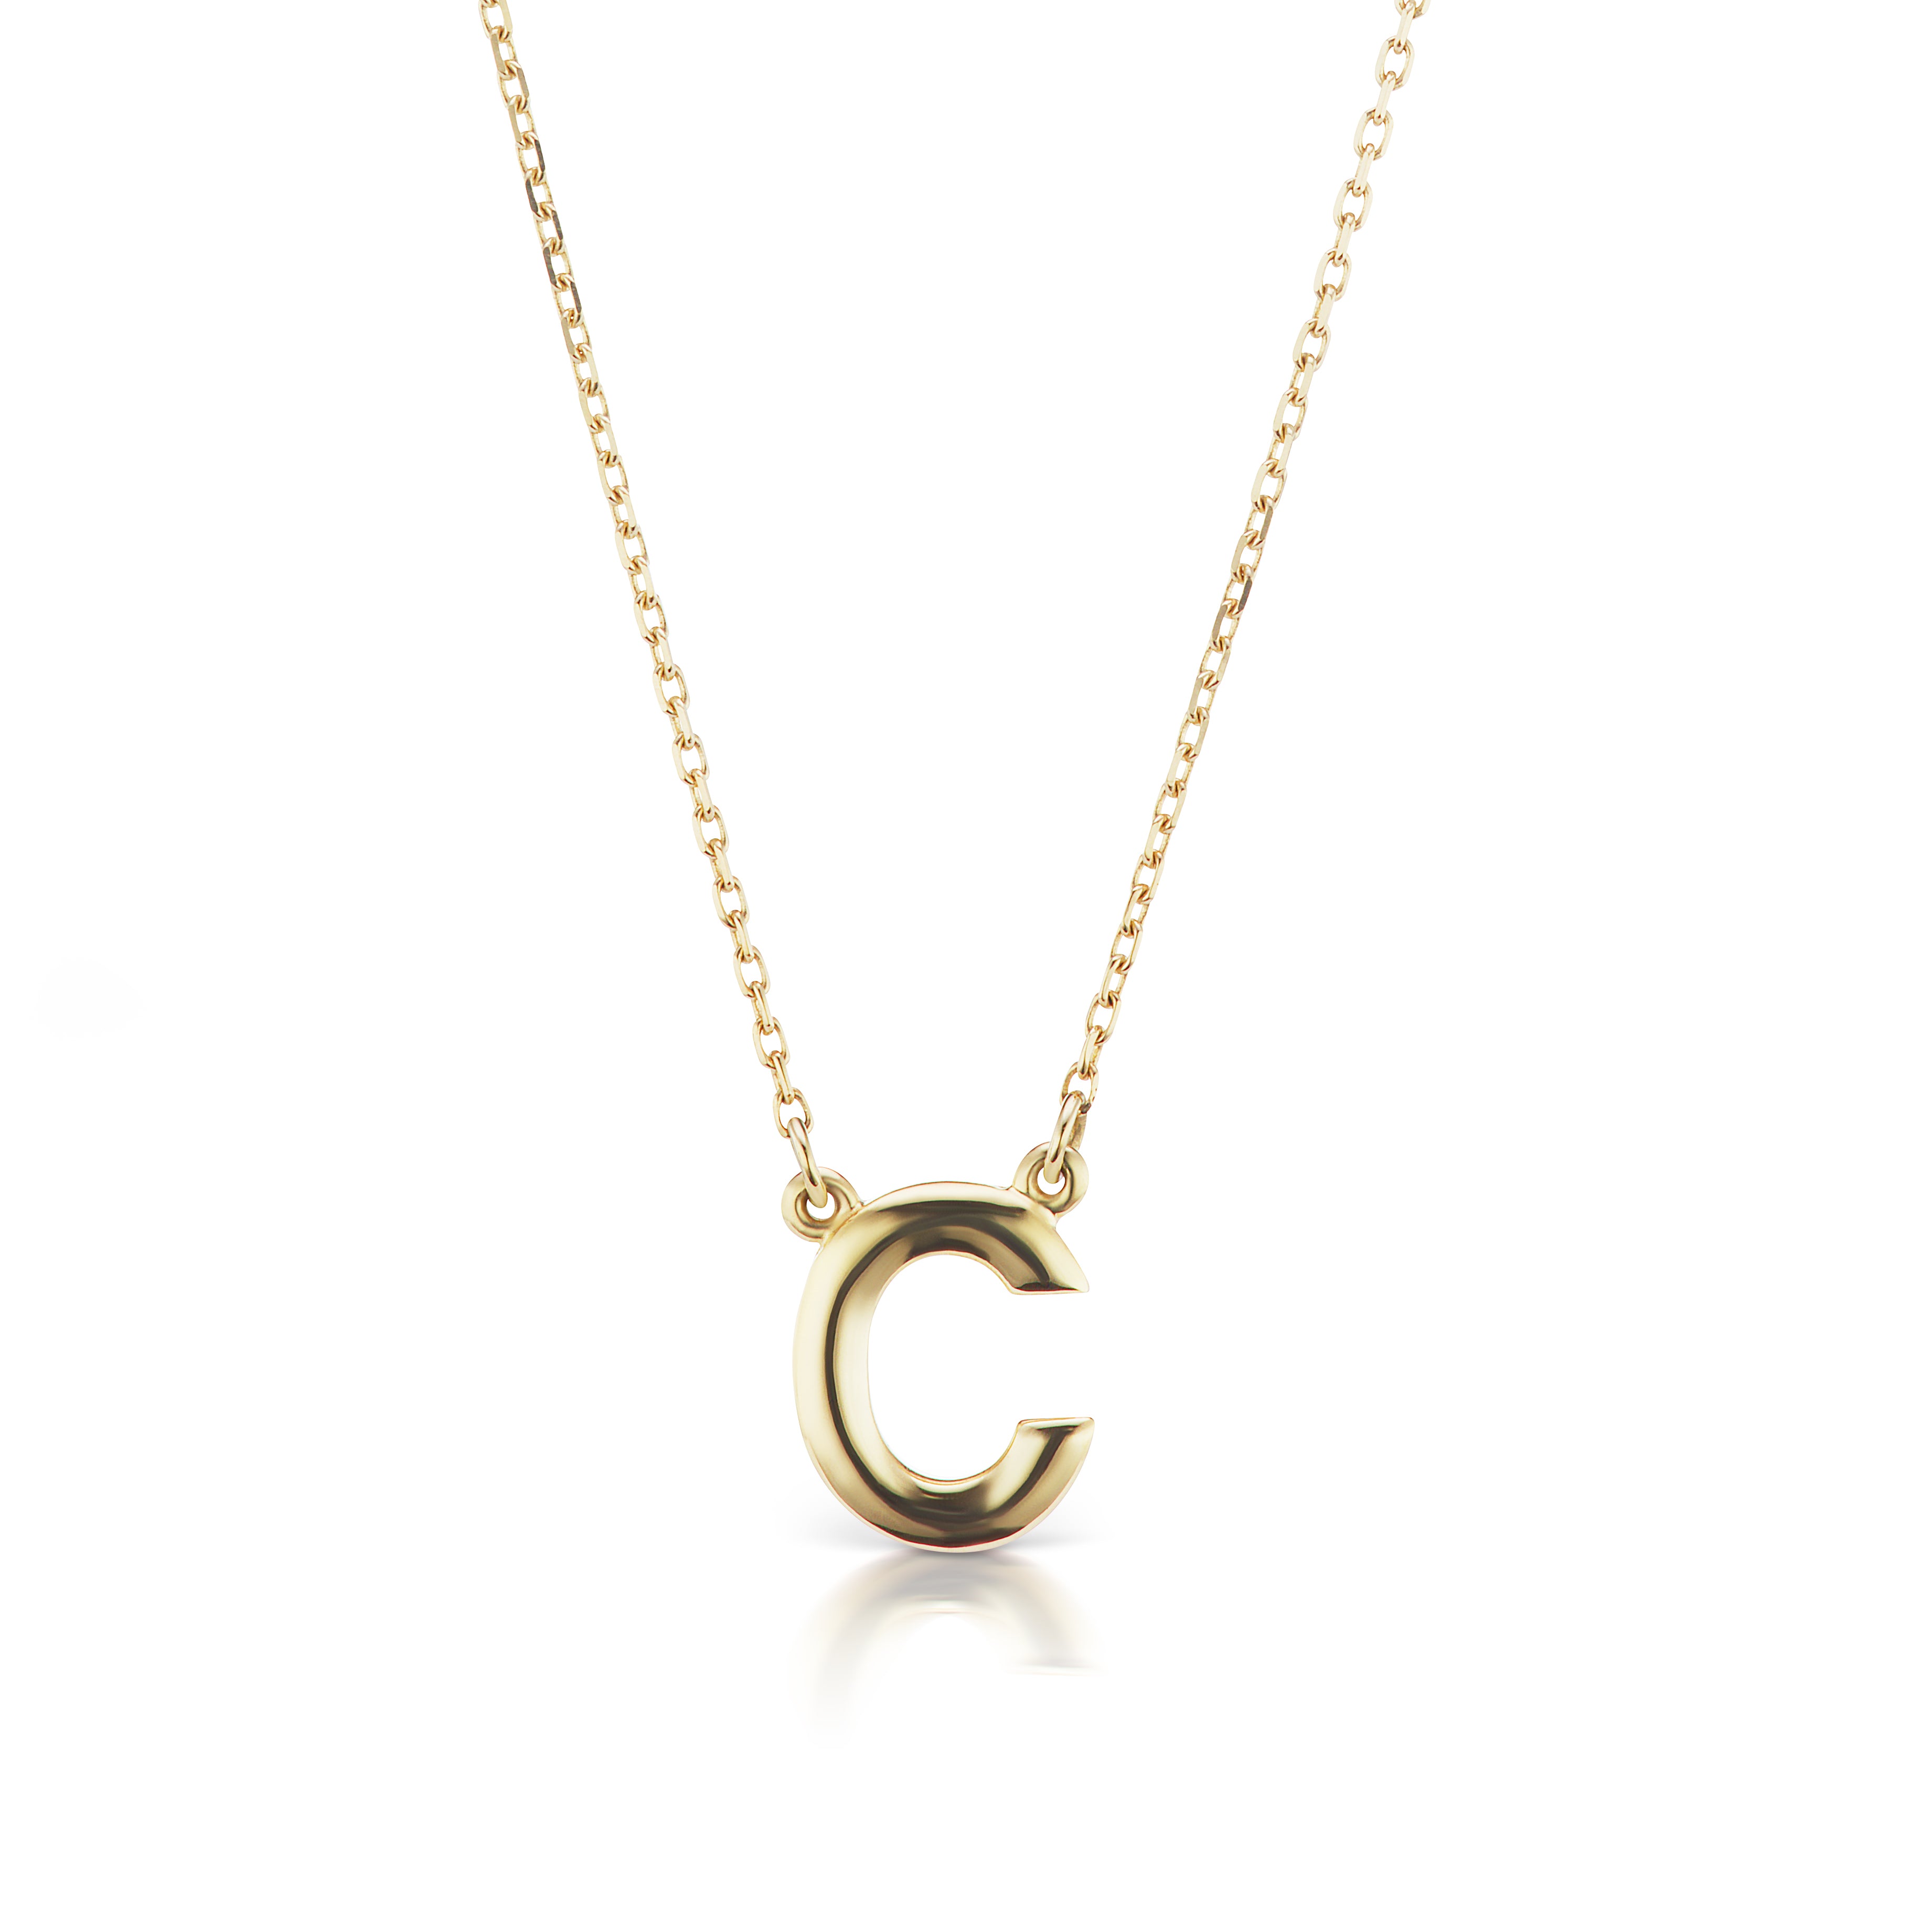 The Gold Initial Necklace